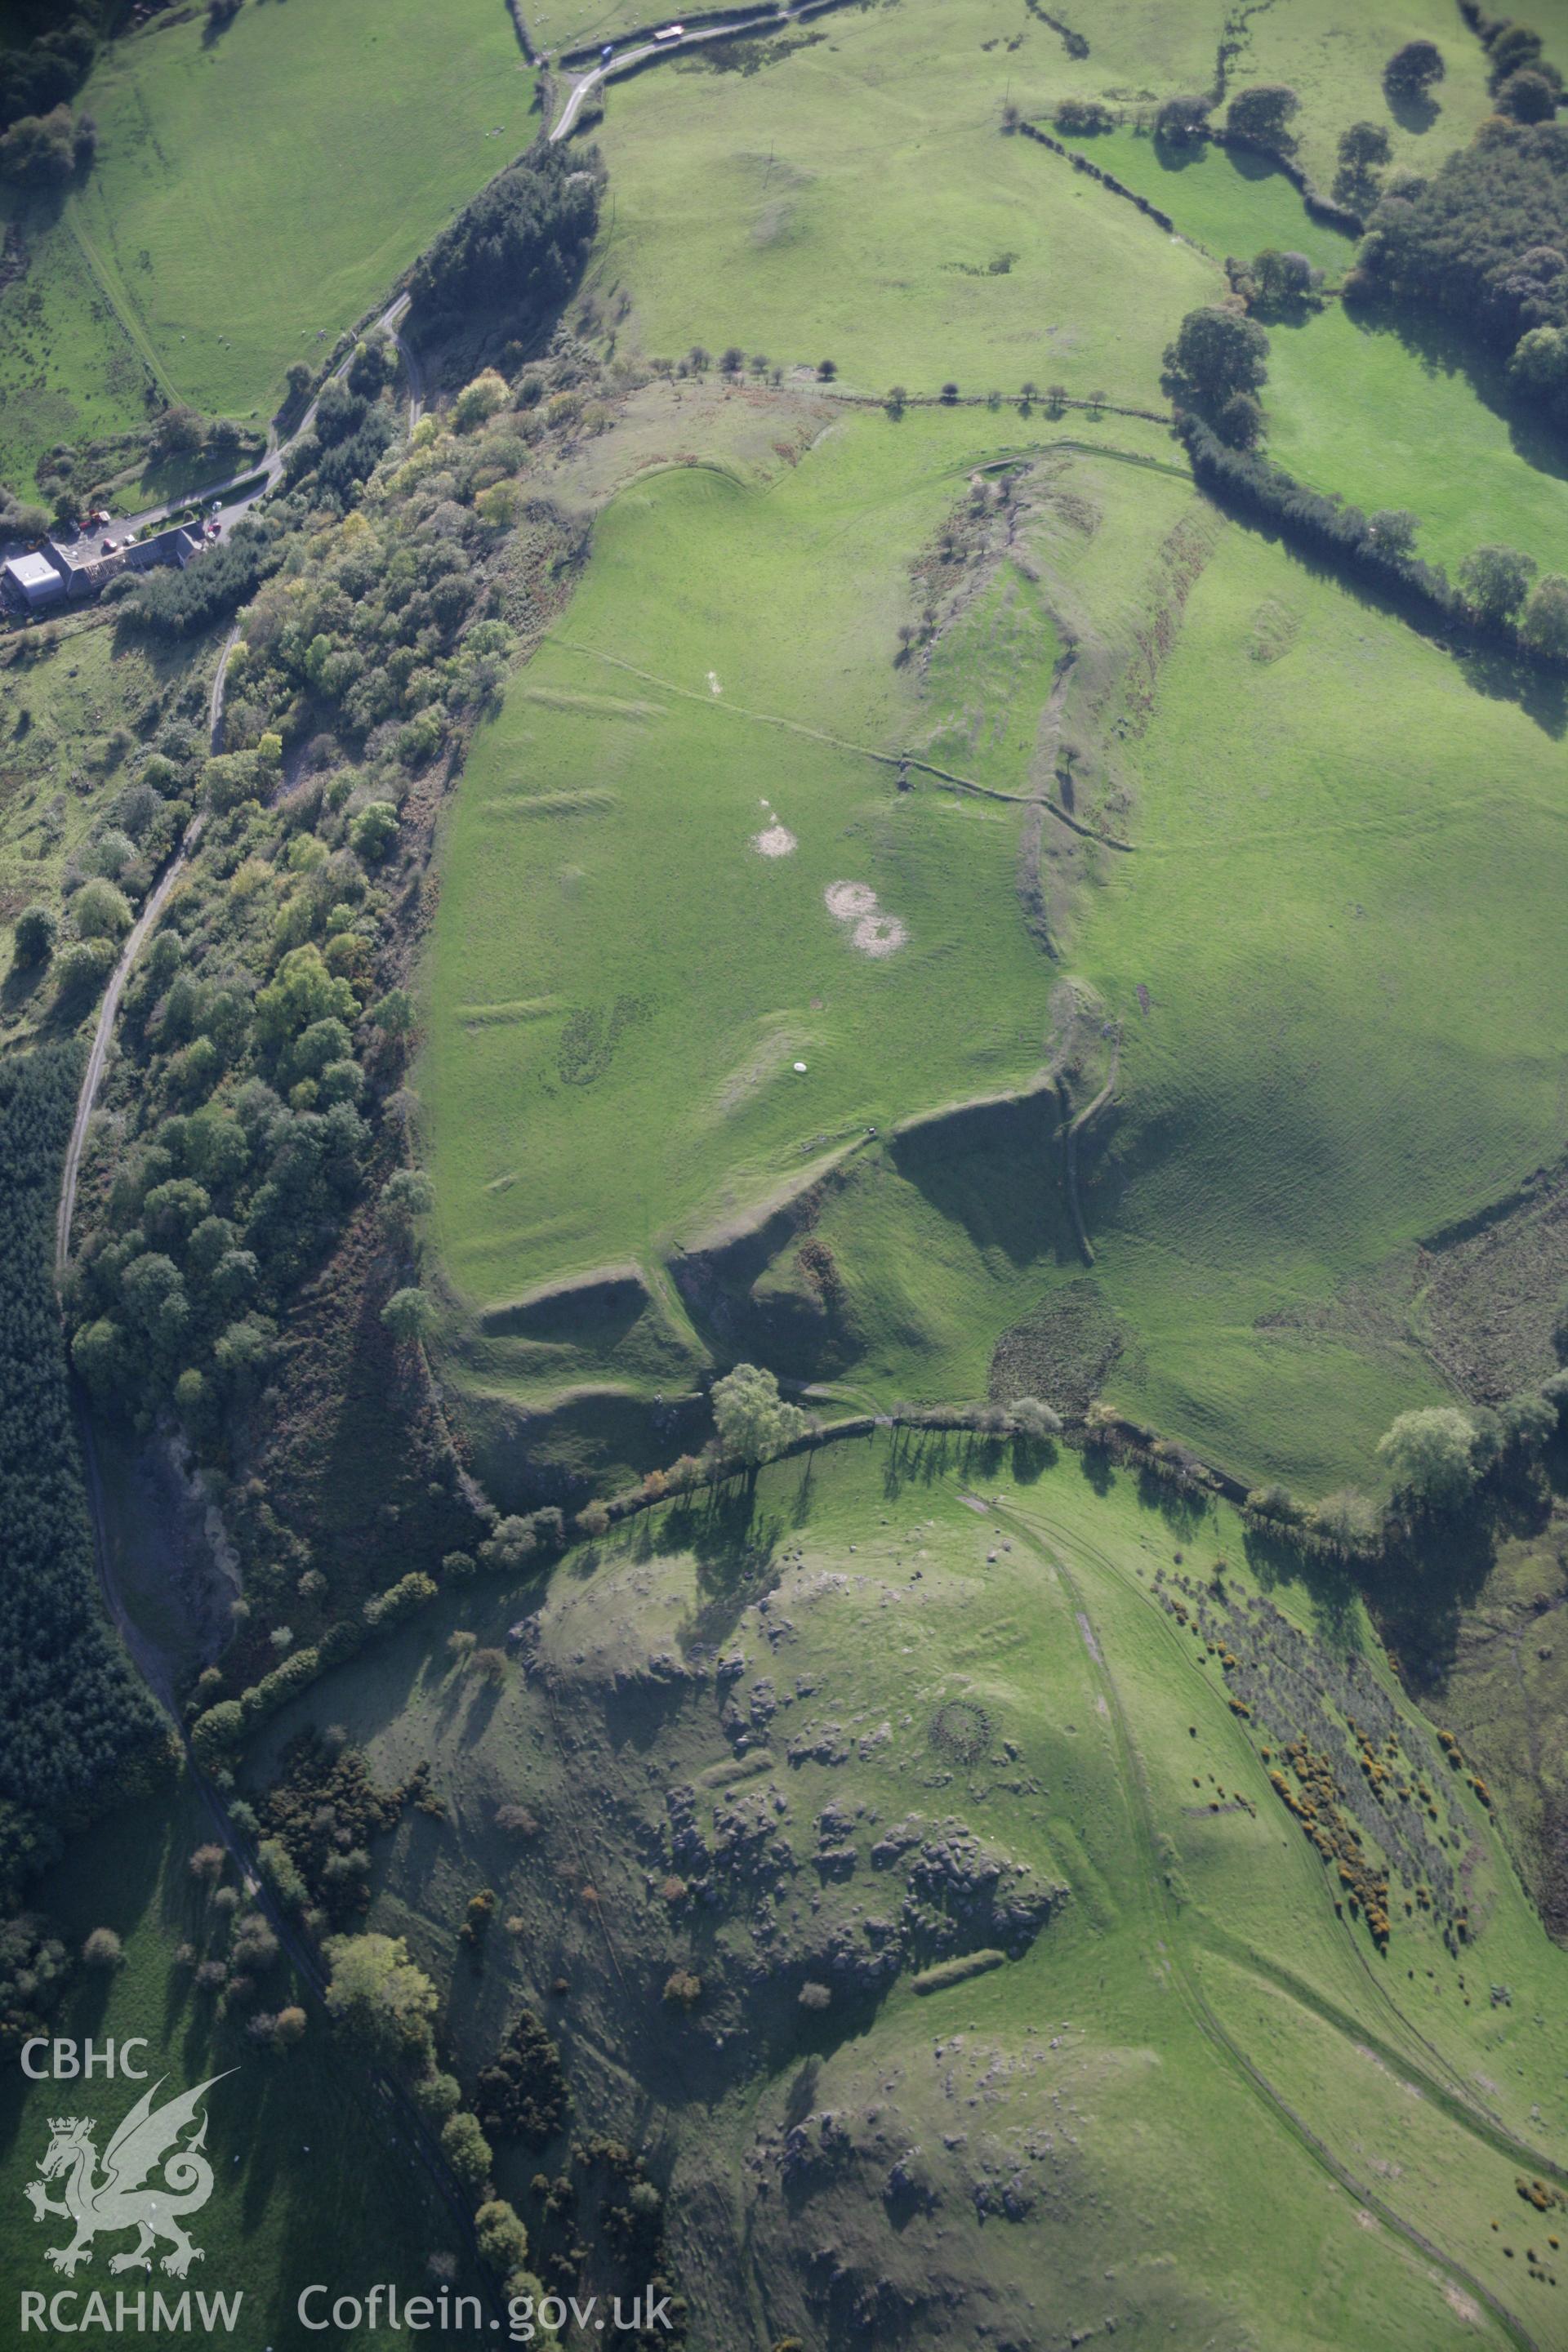 RCAHMW colour oblique aerial photograph of Graig Fawr Camp from the north with pillow mounds visible. Taken on 13 October 2005 by Toby Driver